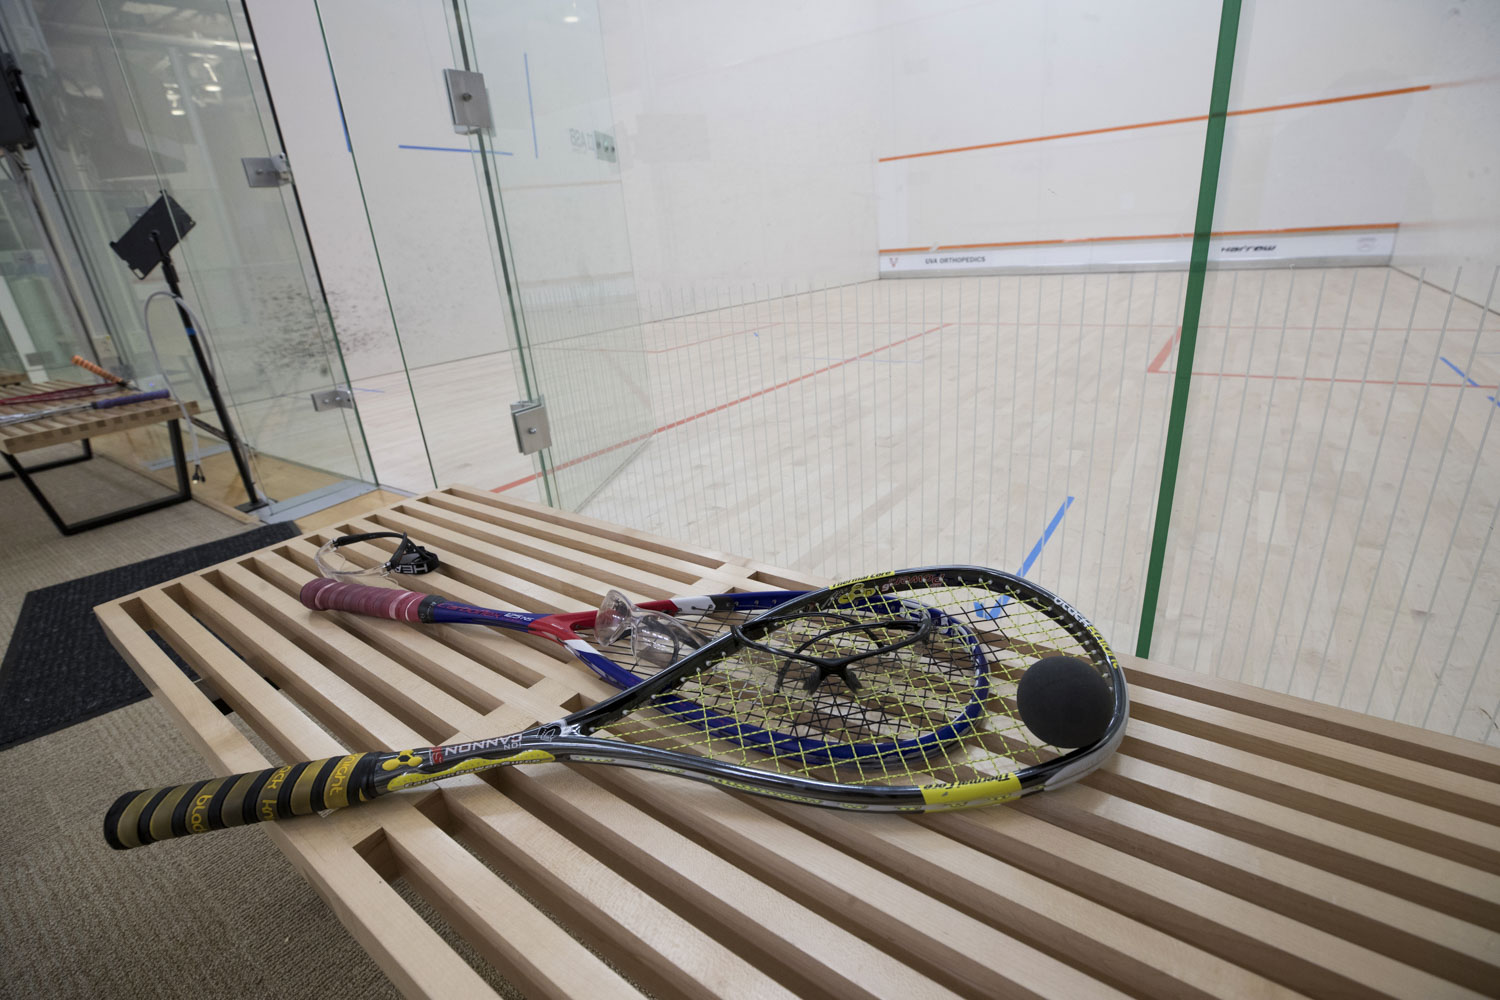 Squash racquets and a ball sitting on a bench outside of the glass enclosed squash court